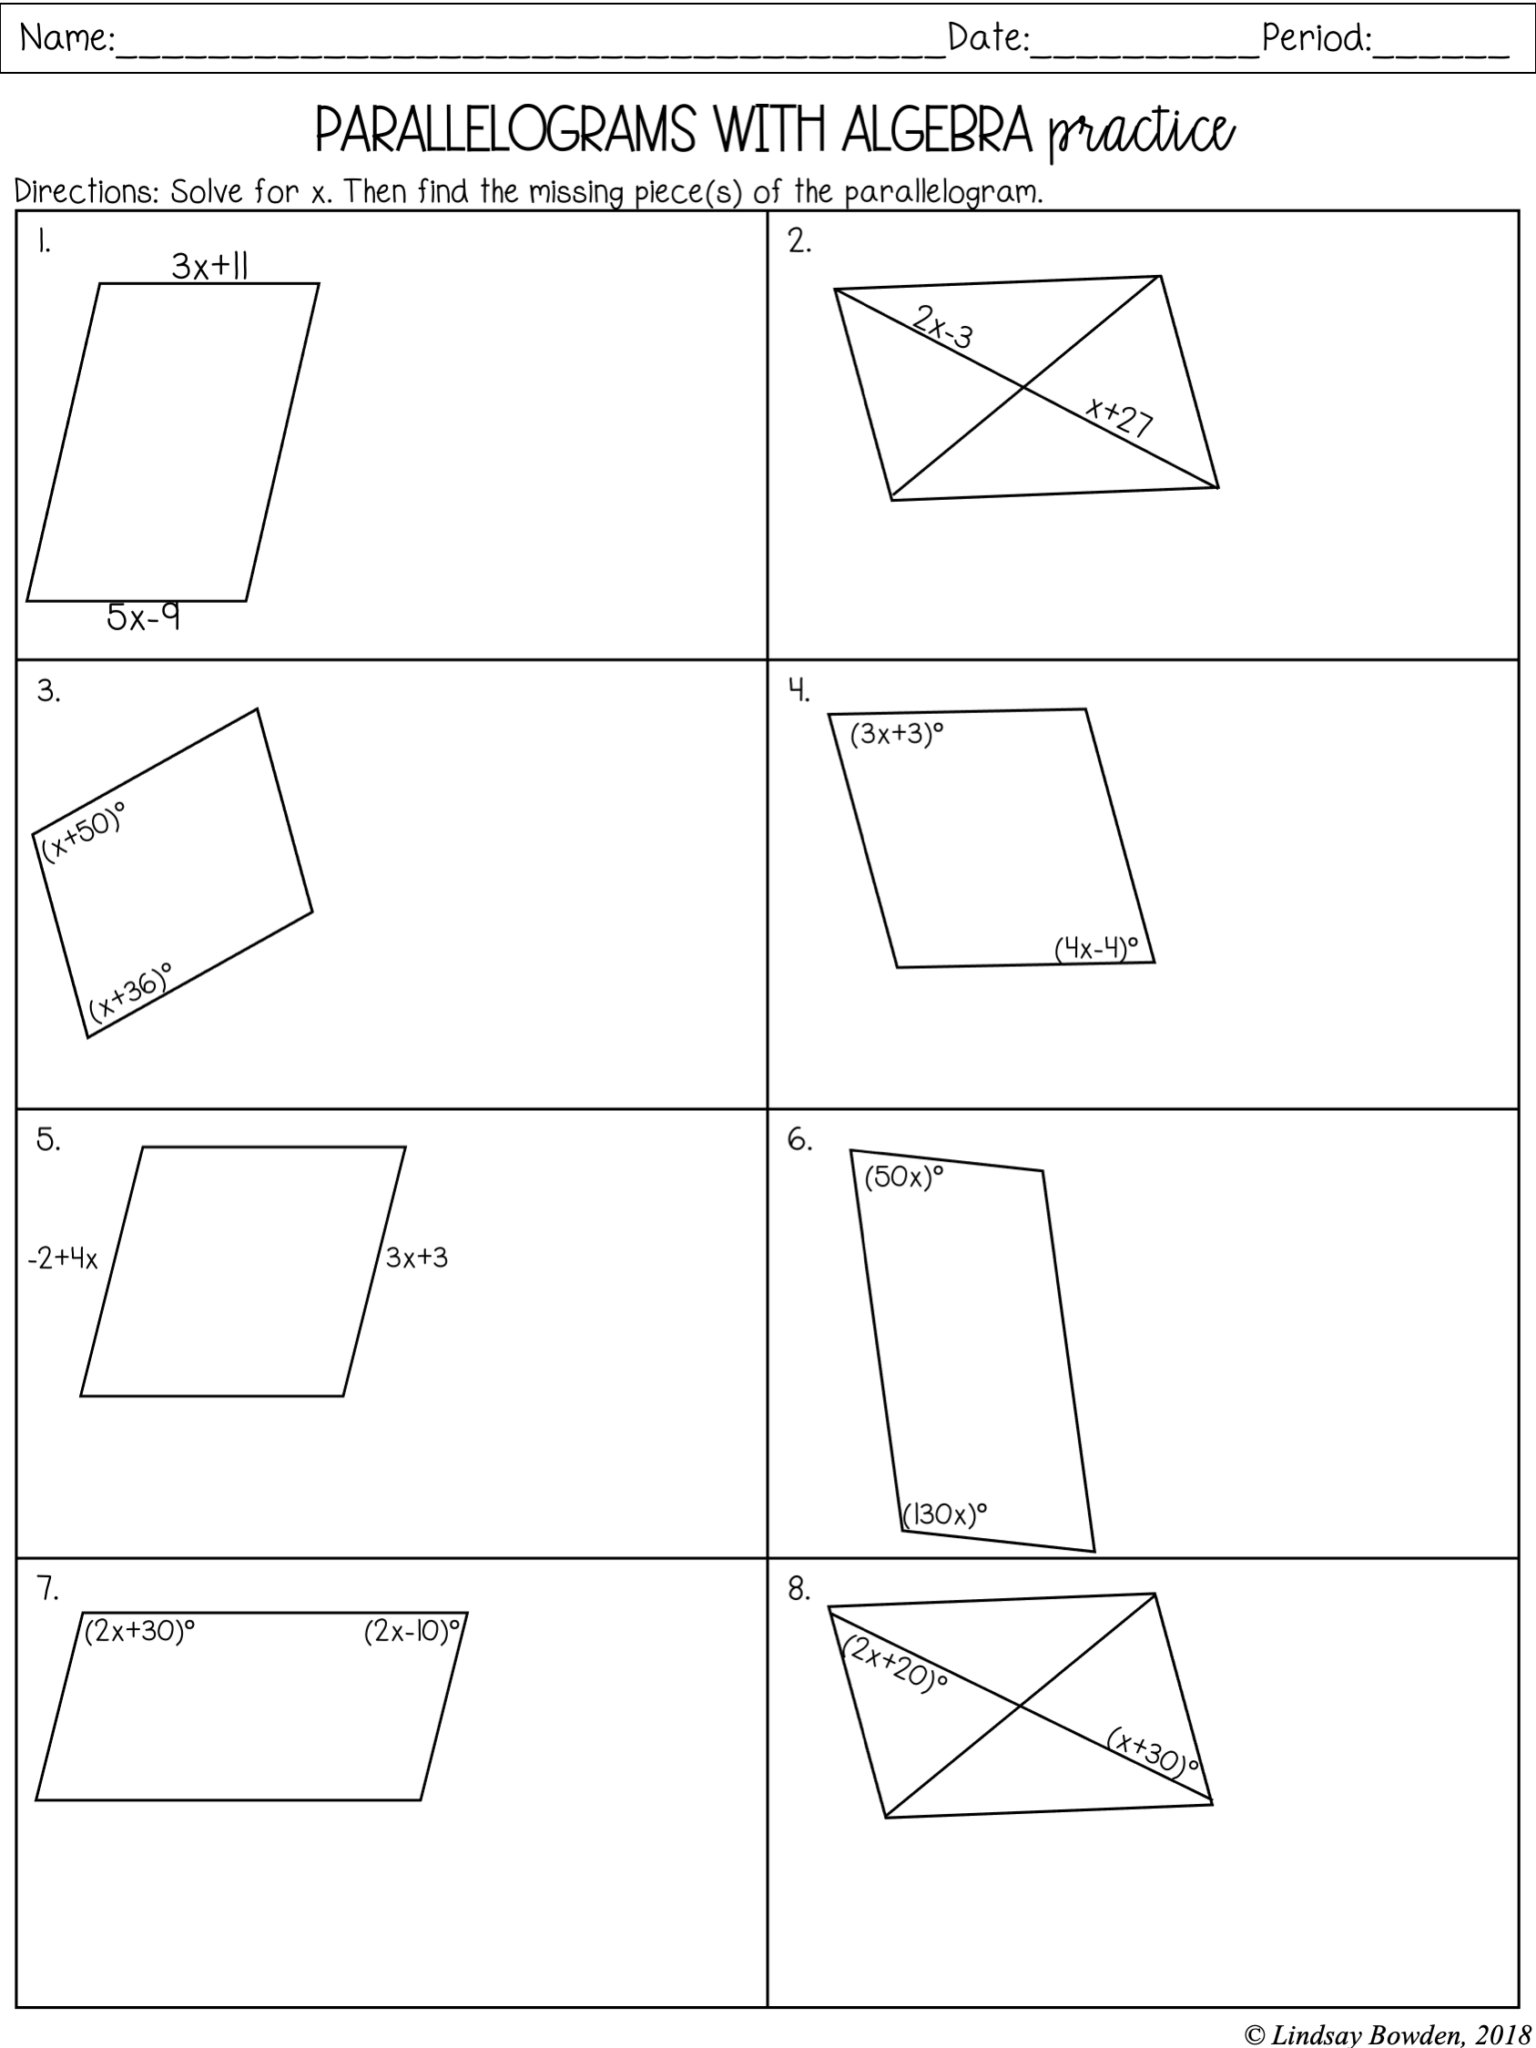 parallelograms-notes-and-worksheets-lindsay-bowden